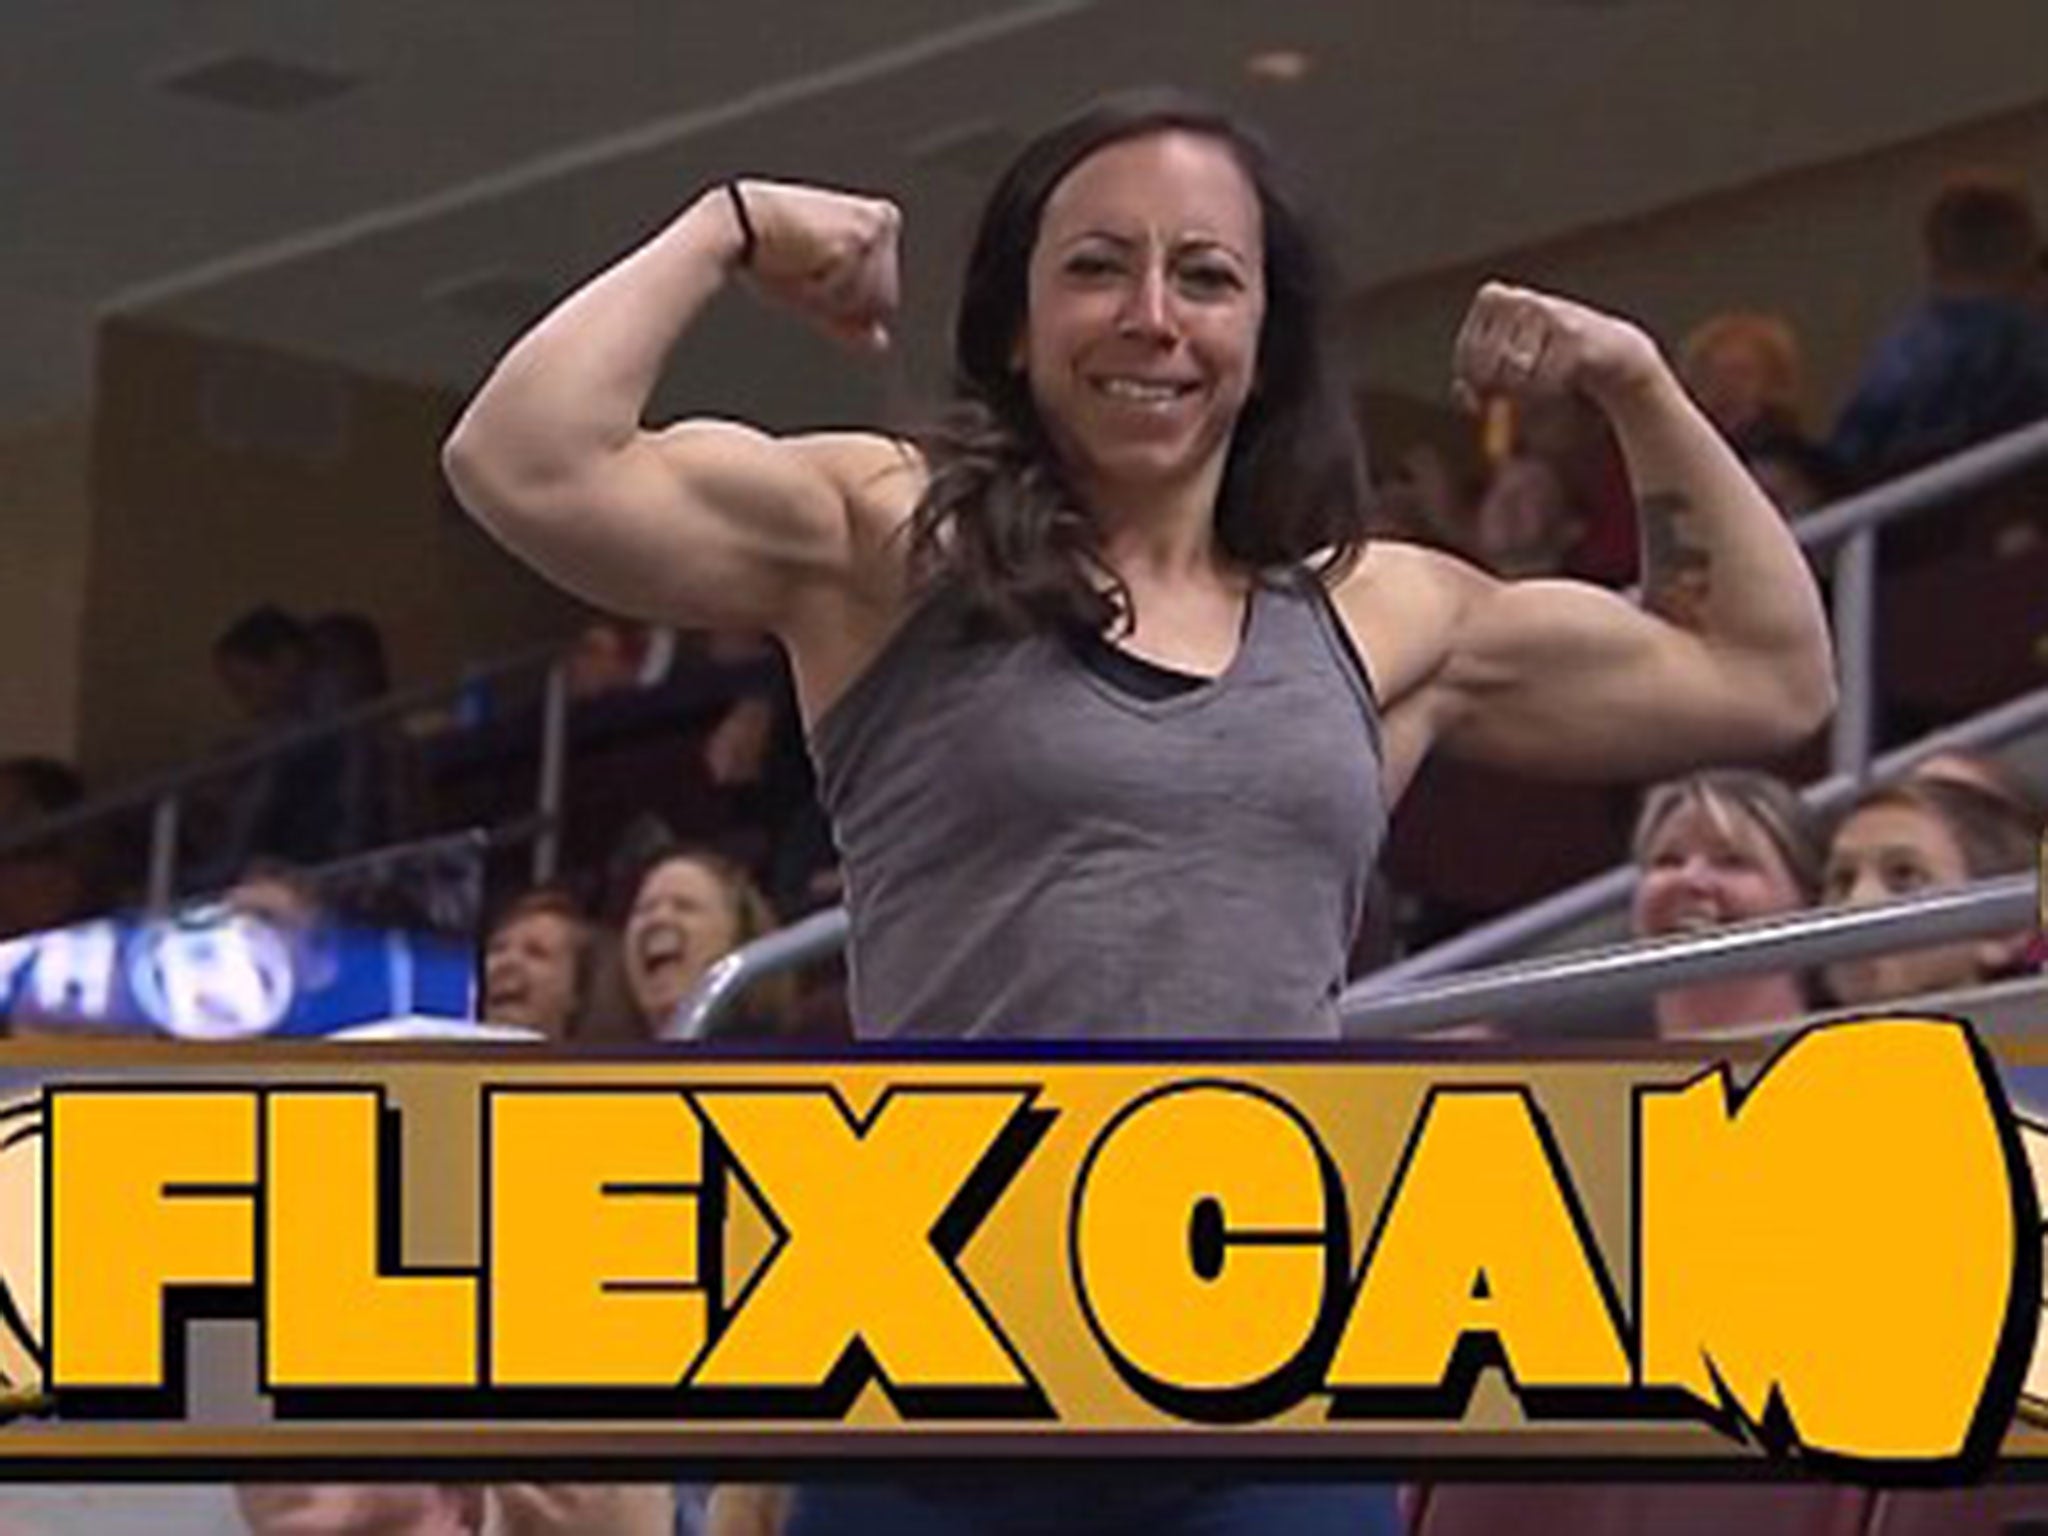 Woman gives everyone tickets to the gun show.